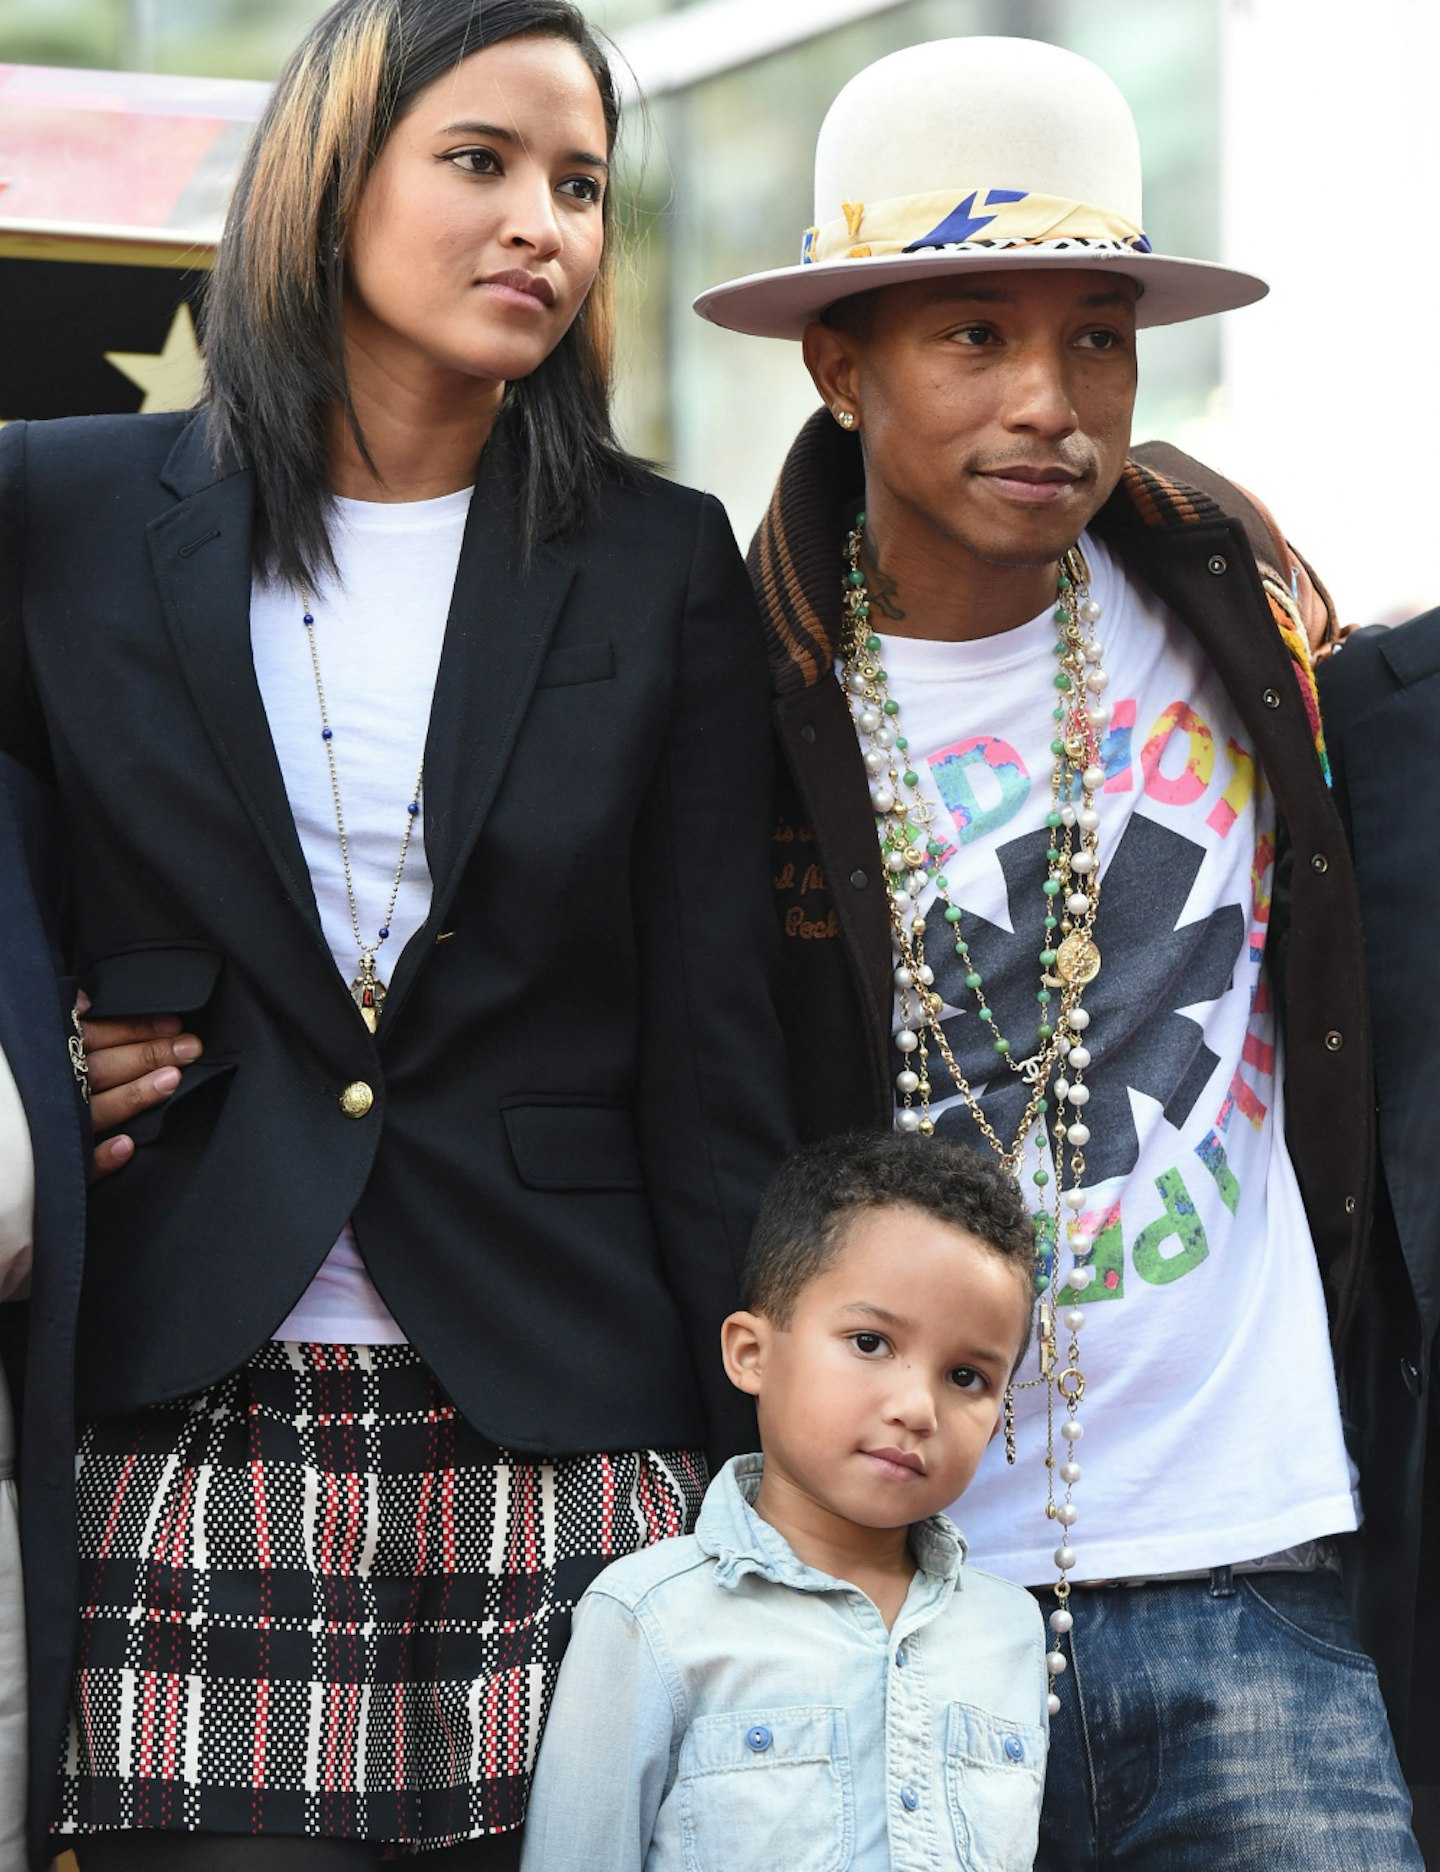 What are Pharrell Williams' triplets names, when were they born